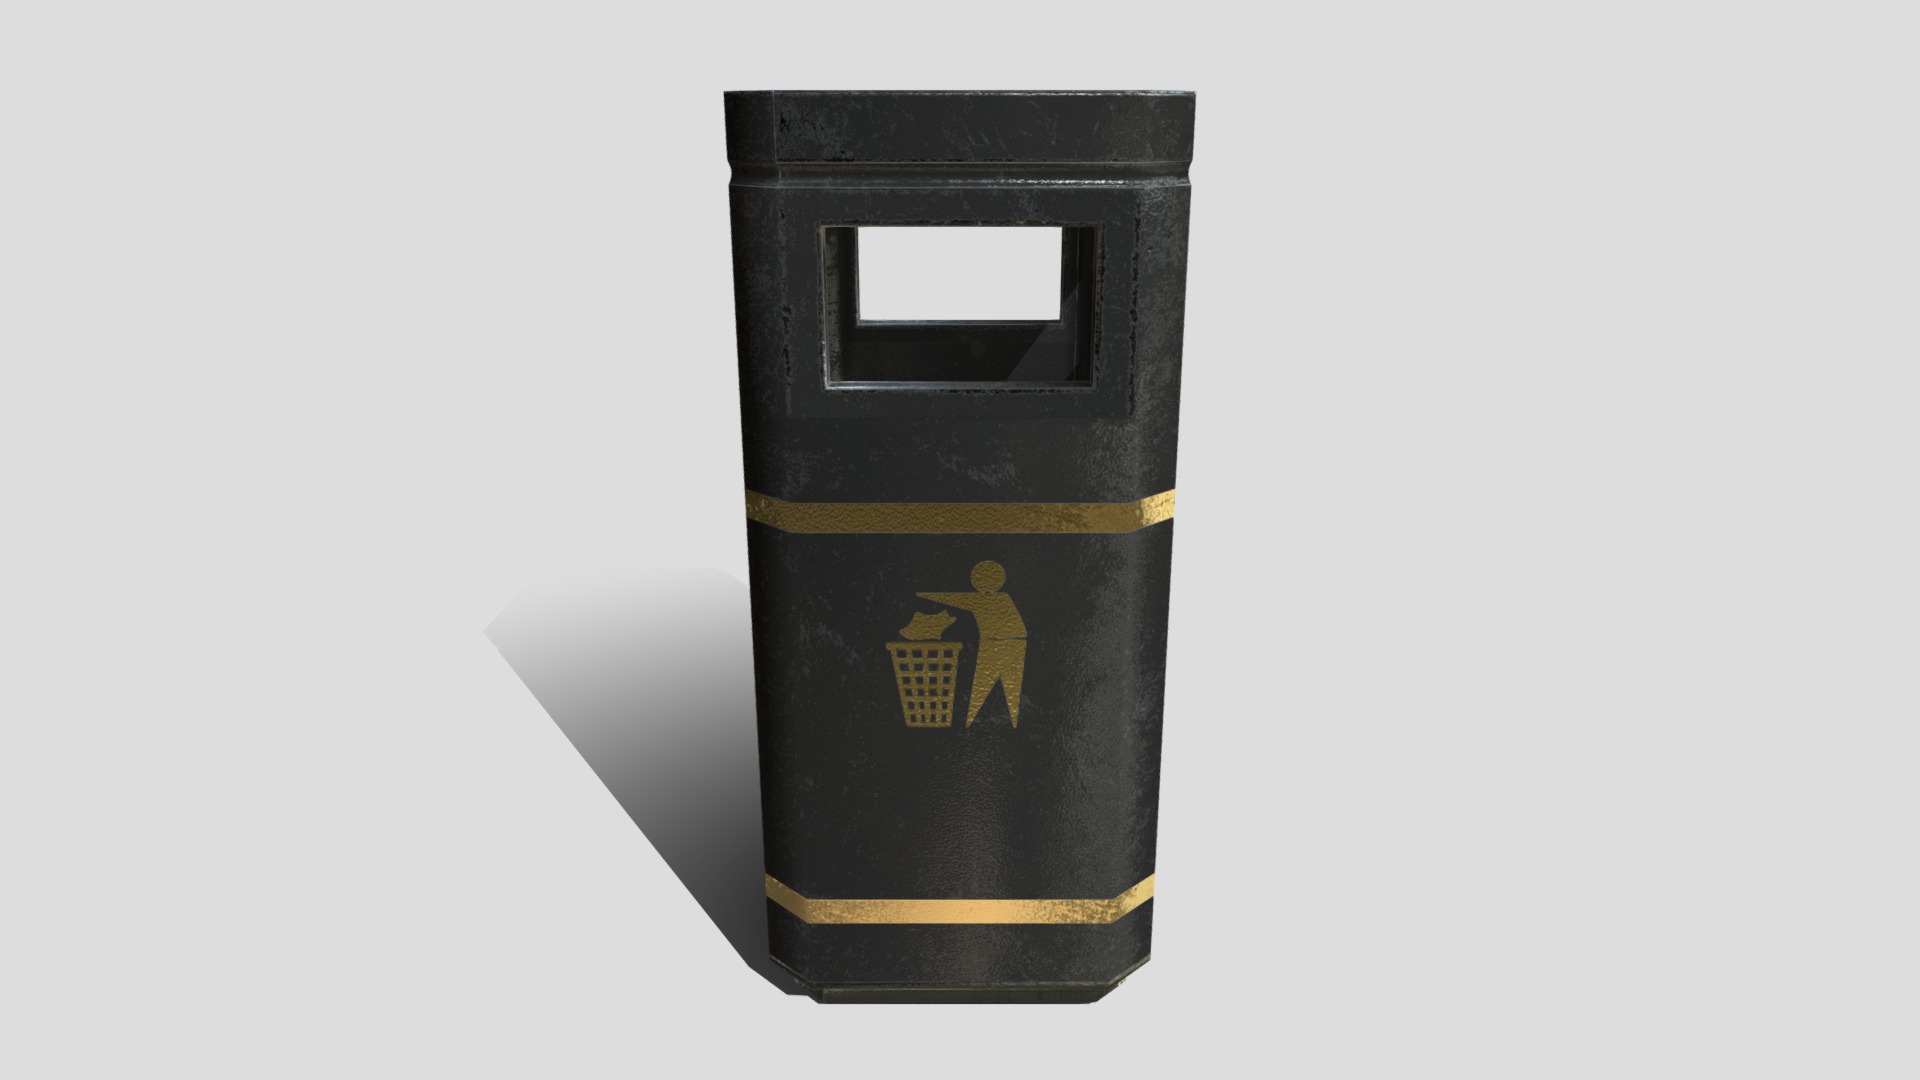 3D model Classic London Litter Bin - This is a 3D model of the Classic London Litter Bin. The 3D model is about a black rectangular object with a yellow and black logo.